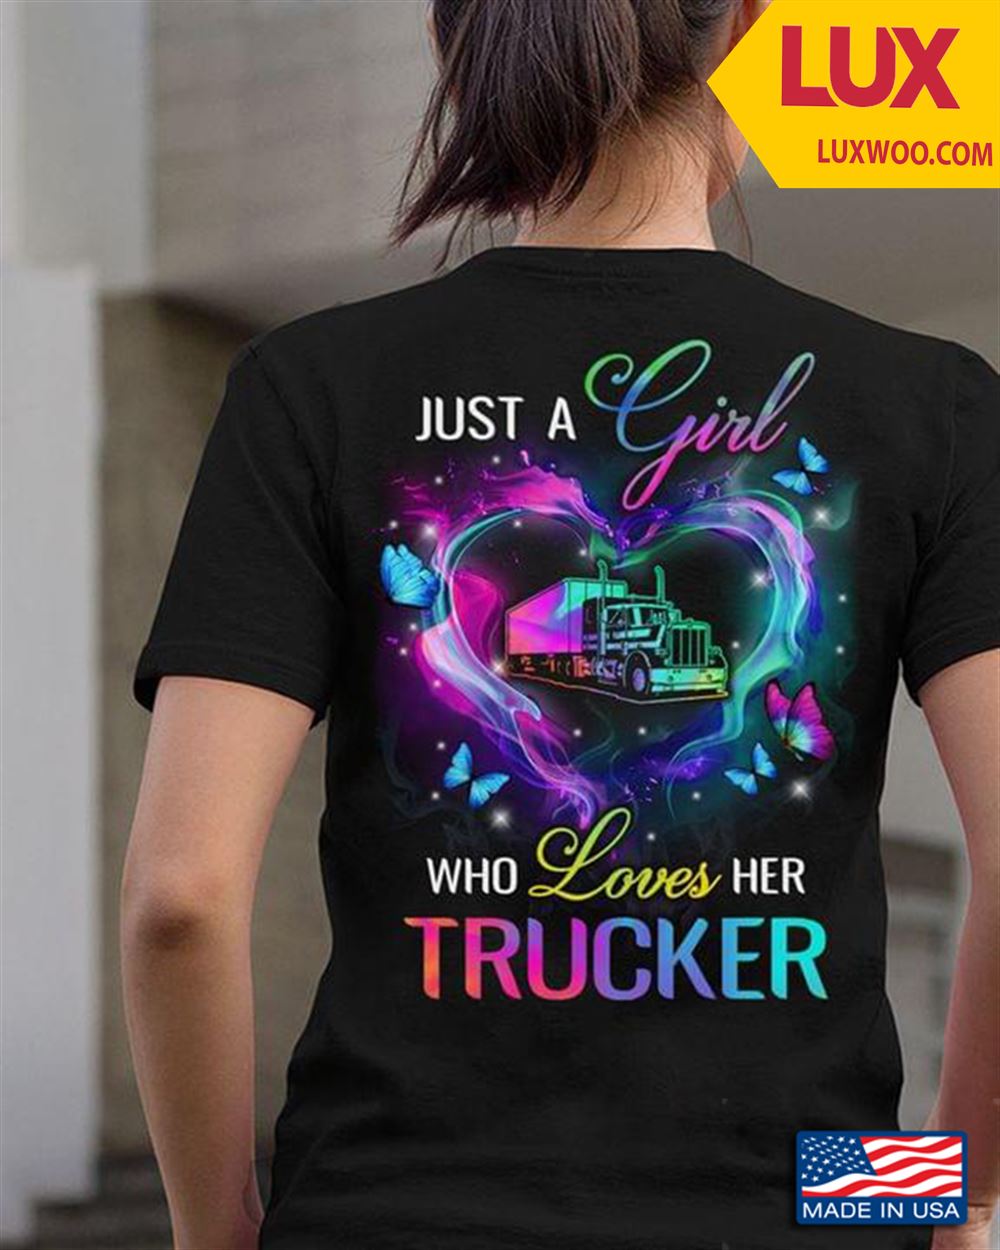 Just A Girl Who Loves Her Trucker Tshirt Size Up To 5xl